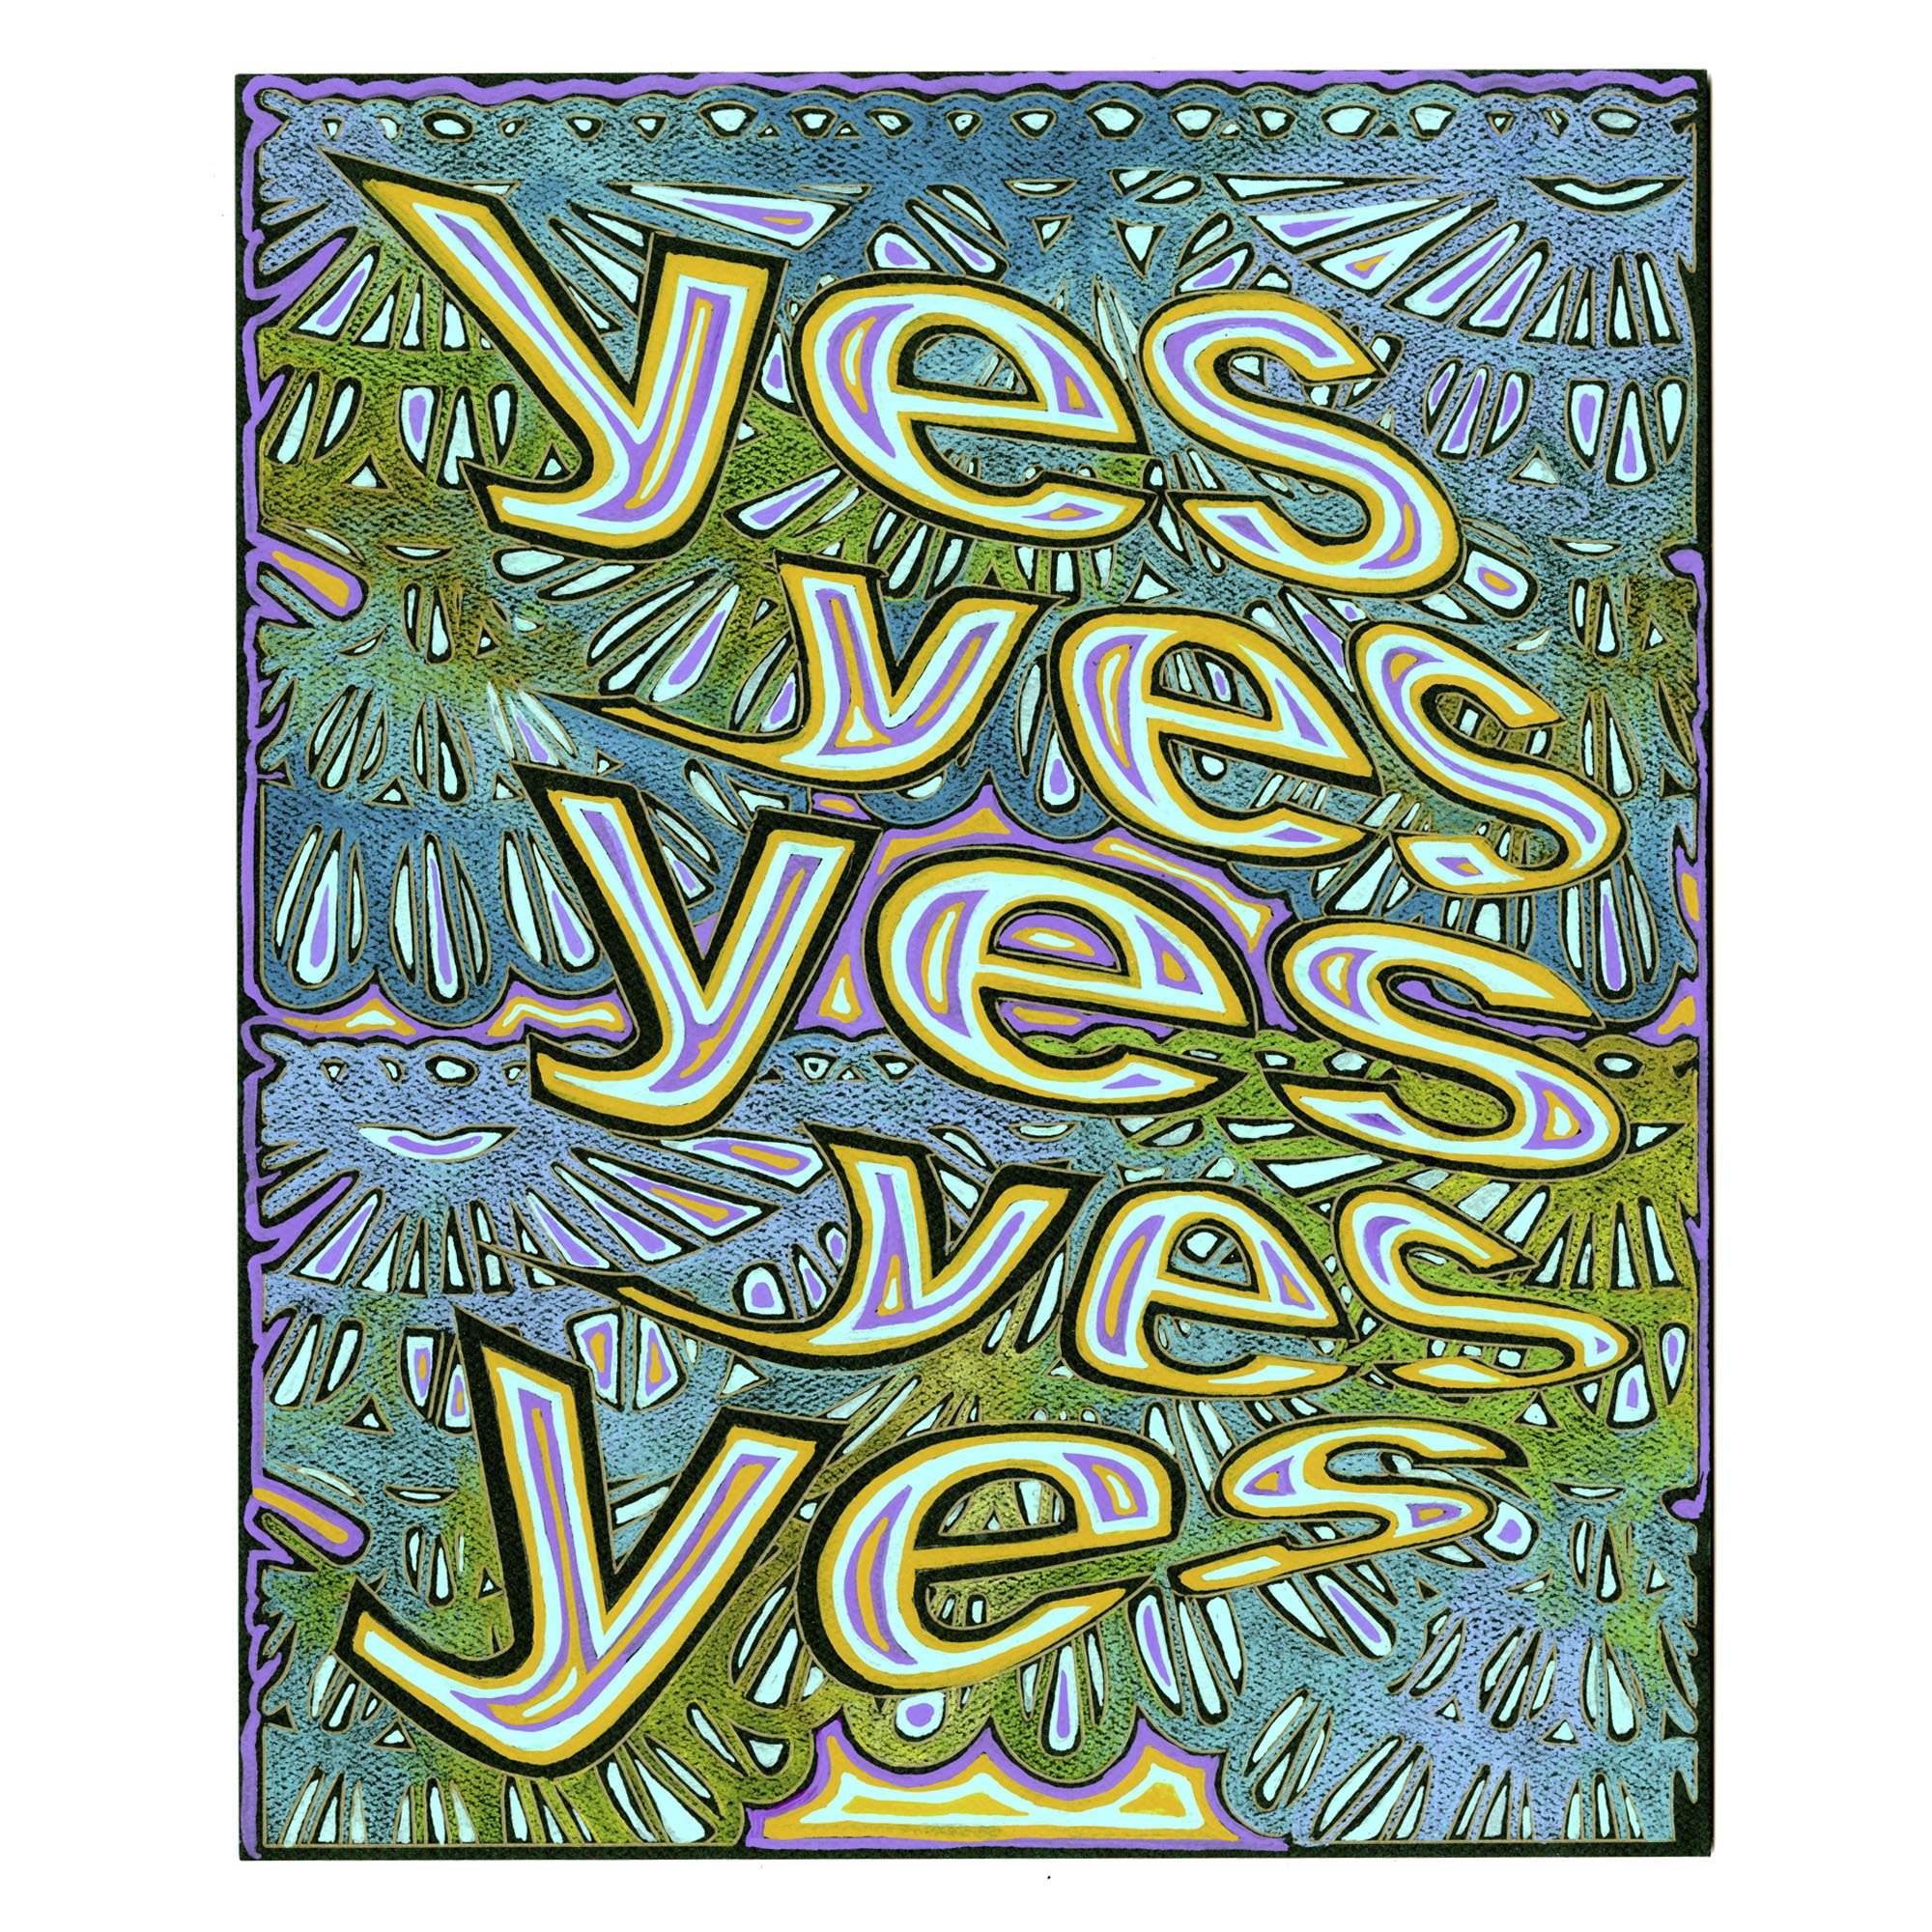   yes yes yes yes yes  (2022); colored pencil and gouache on paper, 9 by 11 inches.  